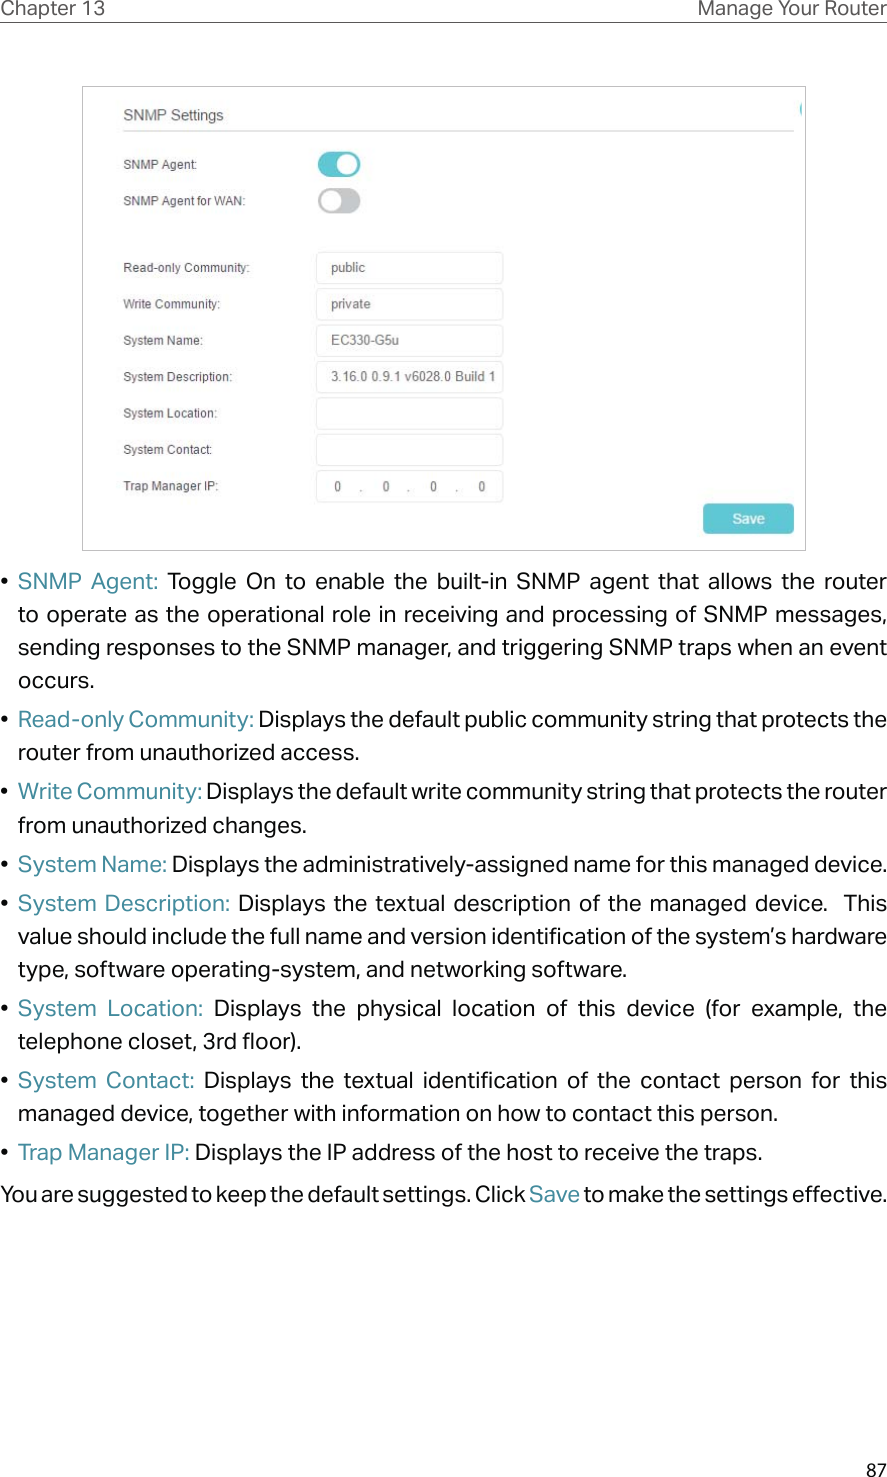 87Chapter 13 Manage Your Router•  SNMP Agent: Toggle On to enable the built-in SNMP agent that allows the router to operate as the operational role in receiving and processing of SNMP messages, sending responses to the SNMP manager, and triggering SNMP traps when an event occurs.•  Read-only Community: Displays the default public community string that protects the router from unauthorized access.•  Write Community: Displays the default write community string that protects the router from unauthorized changes.•  System Name: Displays the administratively-assigned name for this managed device.•  System Description: Displays the textual description of the managed device.  This value should include the full name and version identification of the system’s hardware type, software operating-system, and networking software.•  System Location: Displays the physical location of this device (for example, the telephone closet, 3rd floor).  •  System Contact: Displays the textual identification of the contact person for this managed device, together with information on how to contact this person.•  Trap Manager IP: Displays the IP address of the host to receive the traps.You are suggested to keep the default settings. Click Save to make the settings effective.